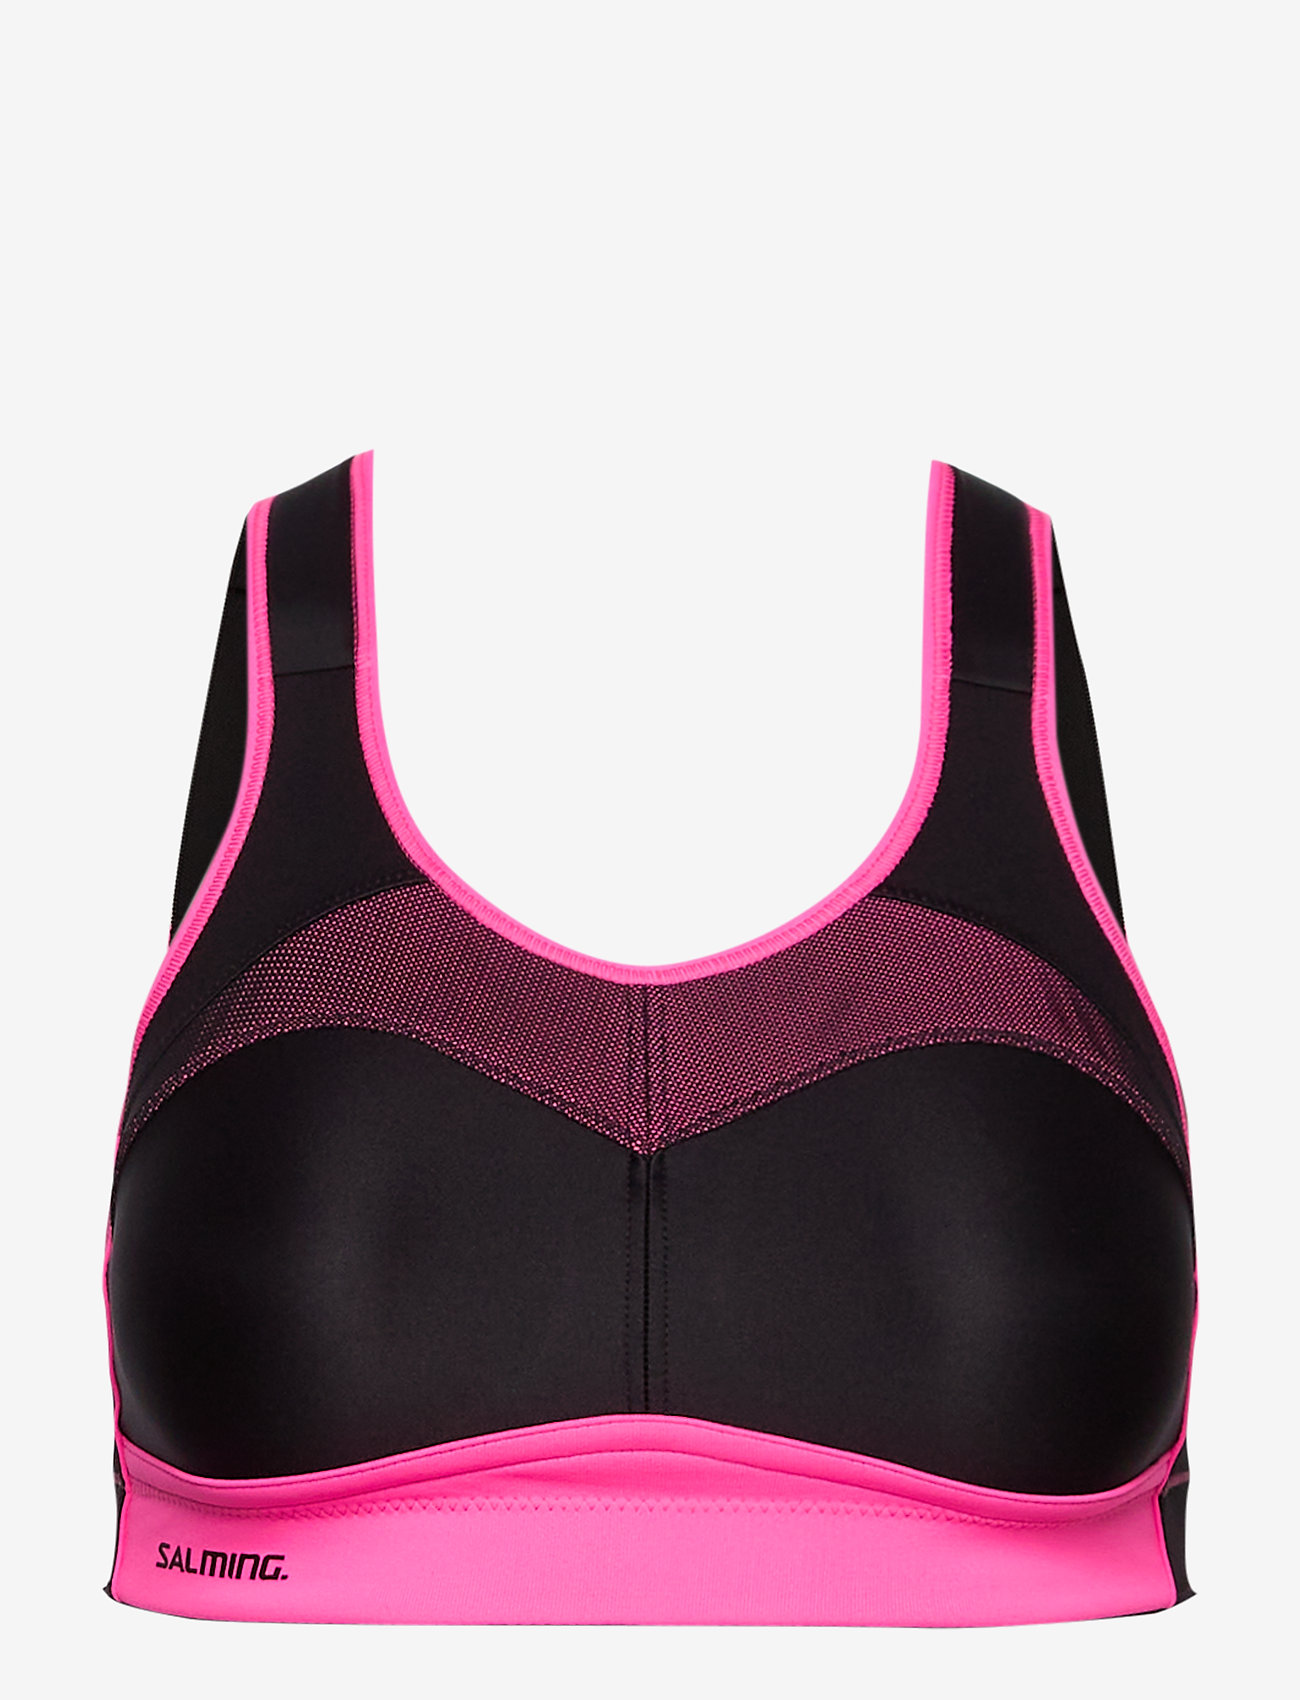 Salming - Capacity, Sports top - sport bh's - pink - 1